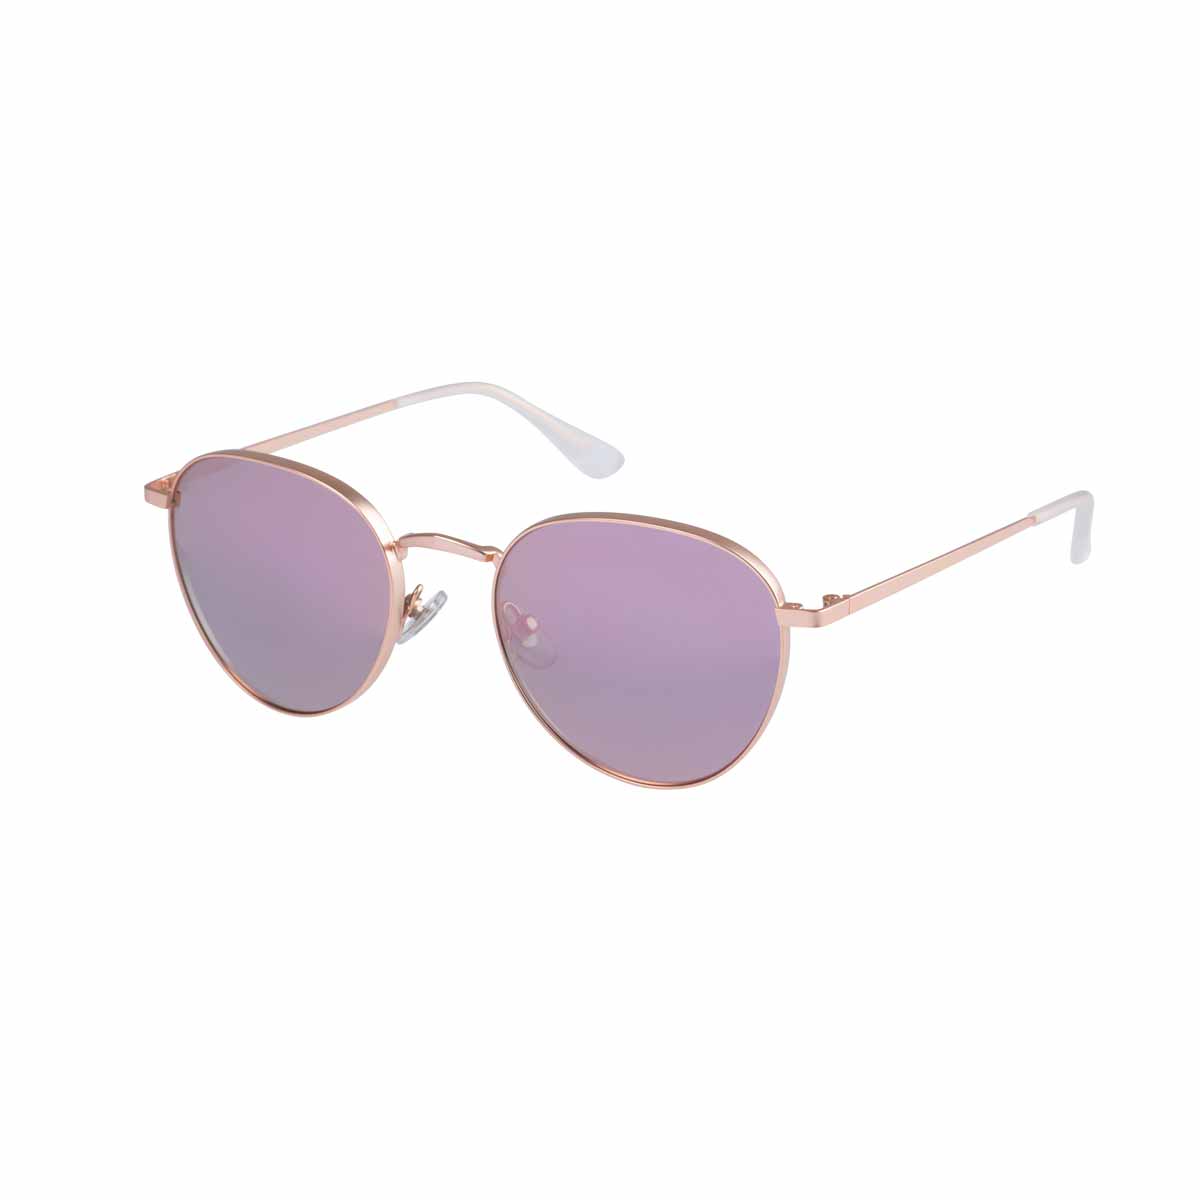 O'Neill 9013 2.0 saulesbrilles – 072P Rose Gold